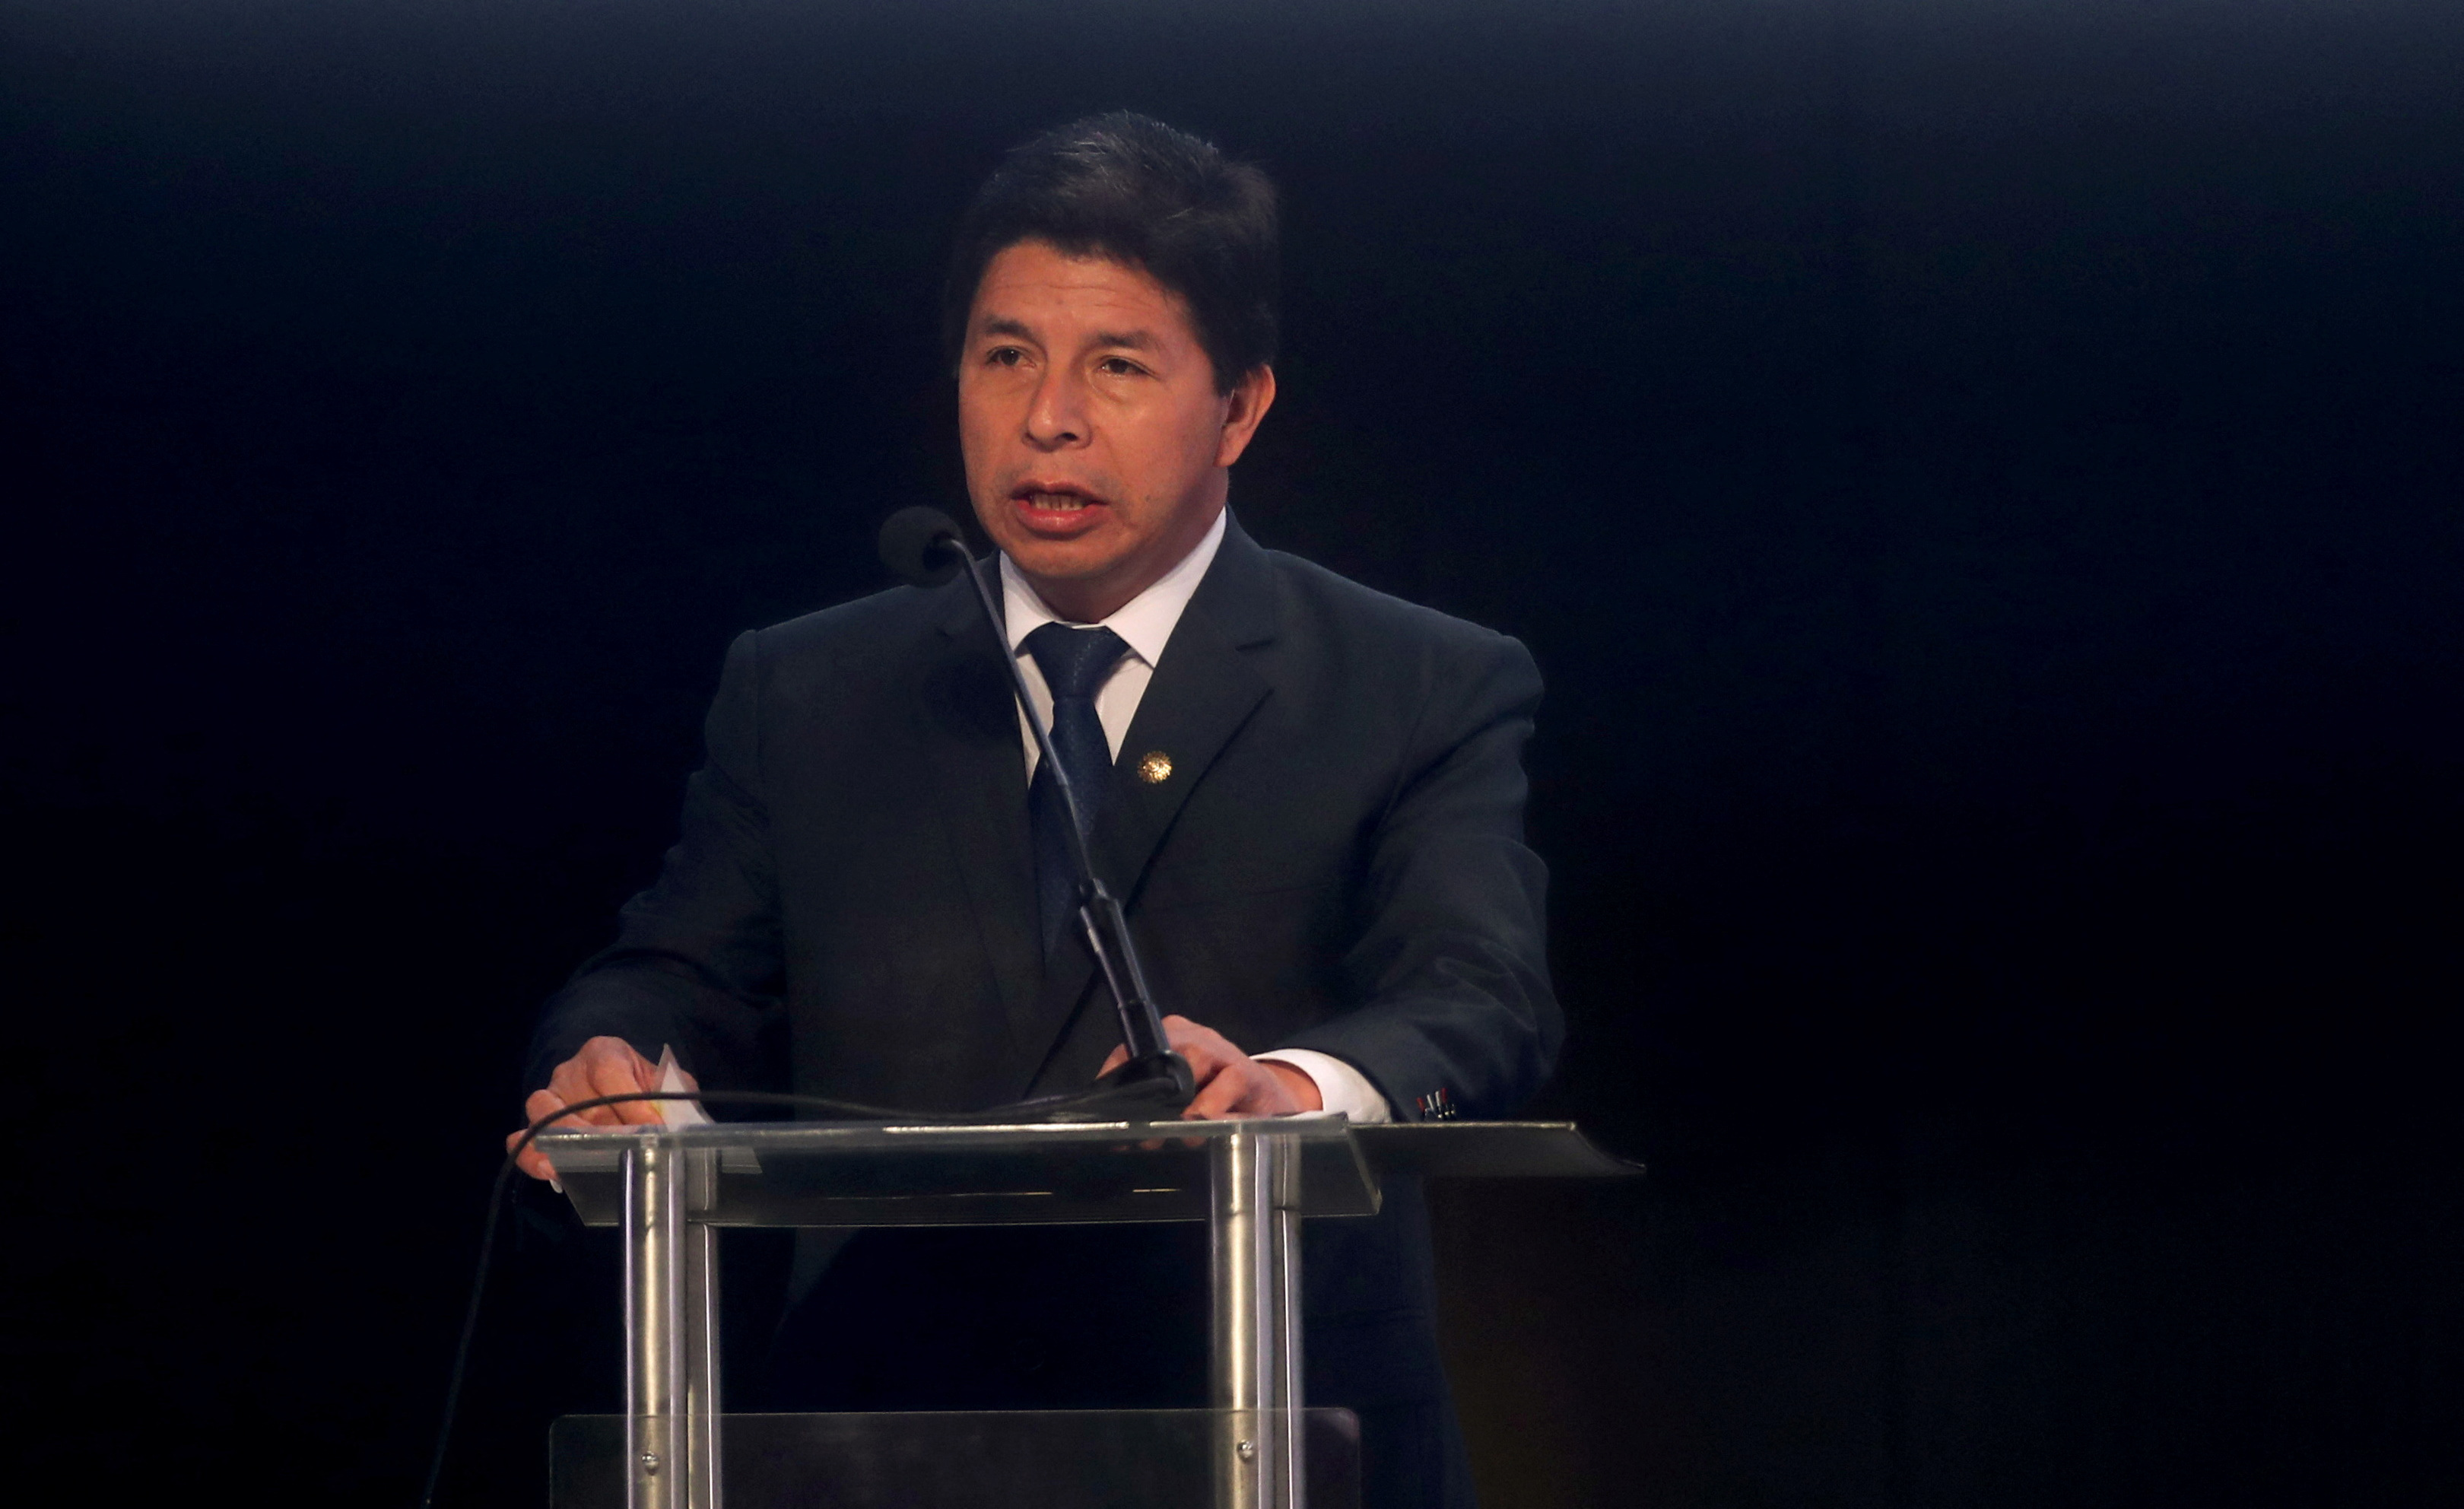 VII Ministerial Summit on Government and Digital Transformation of the Americas, in Lima